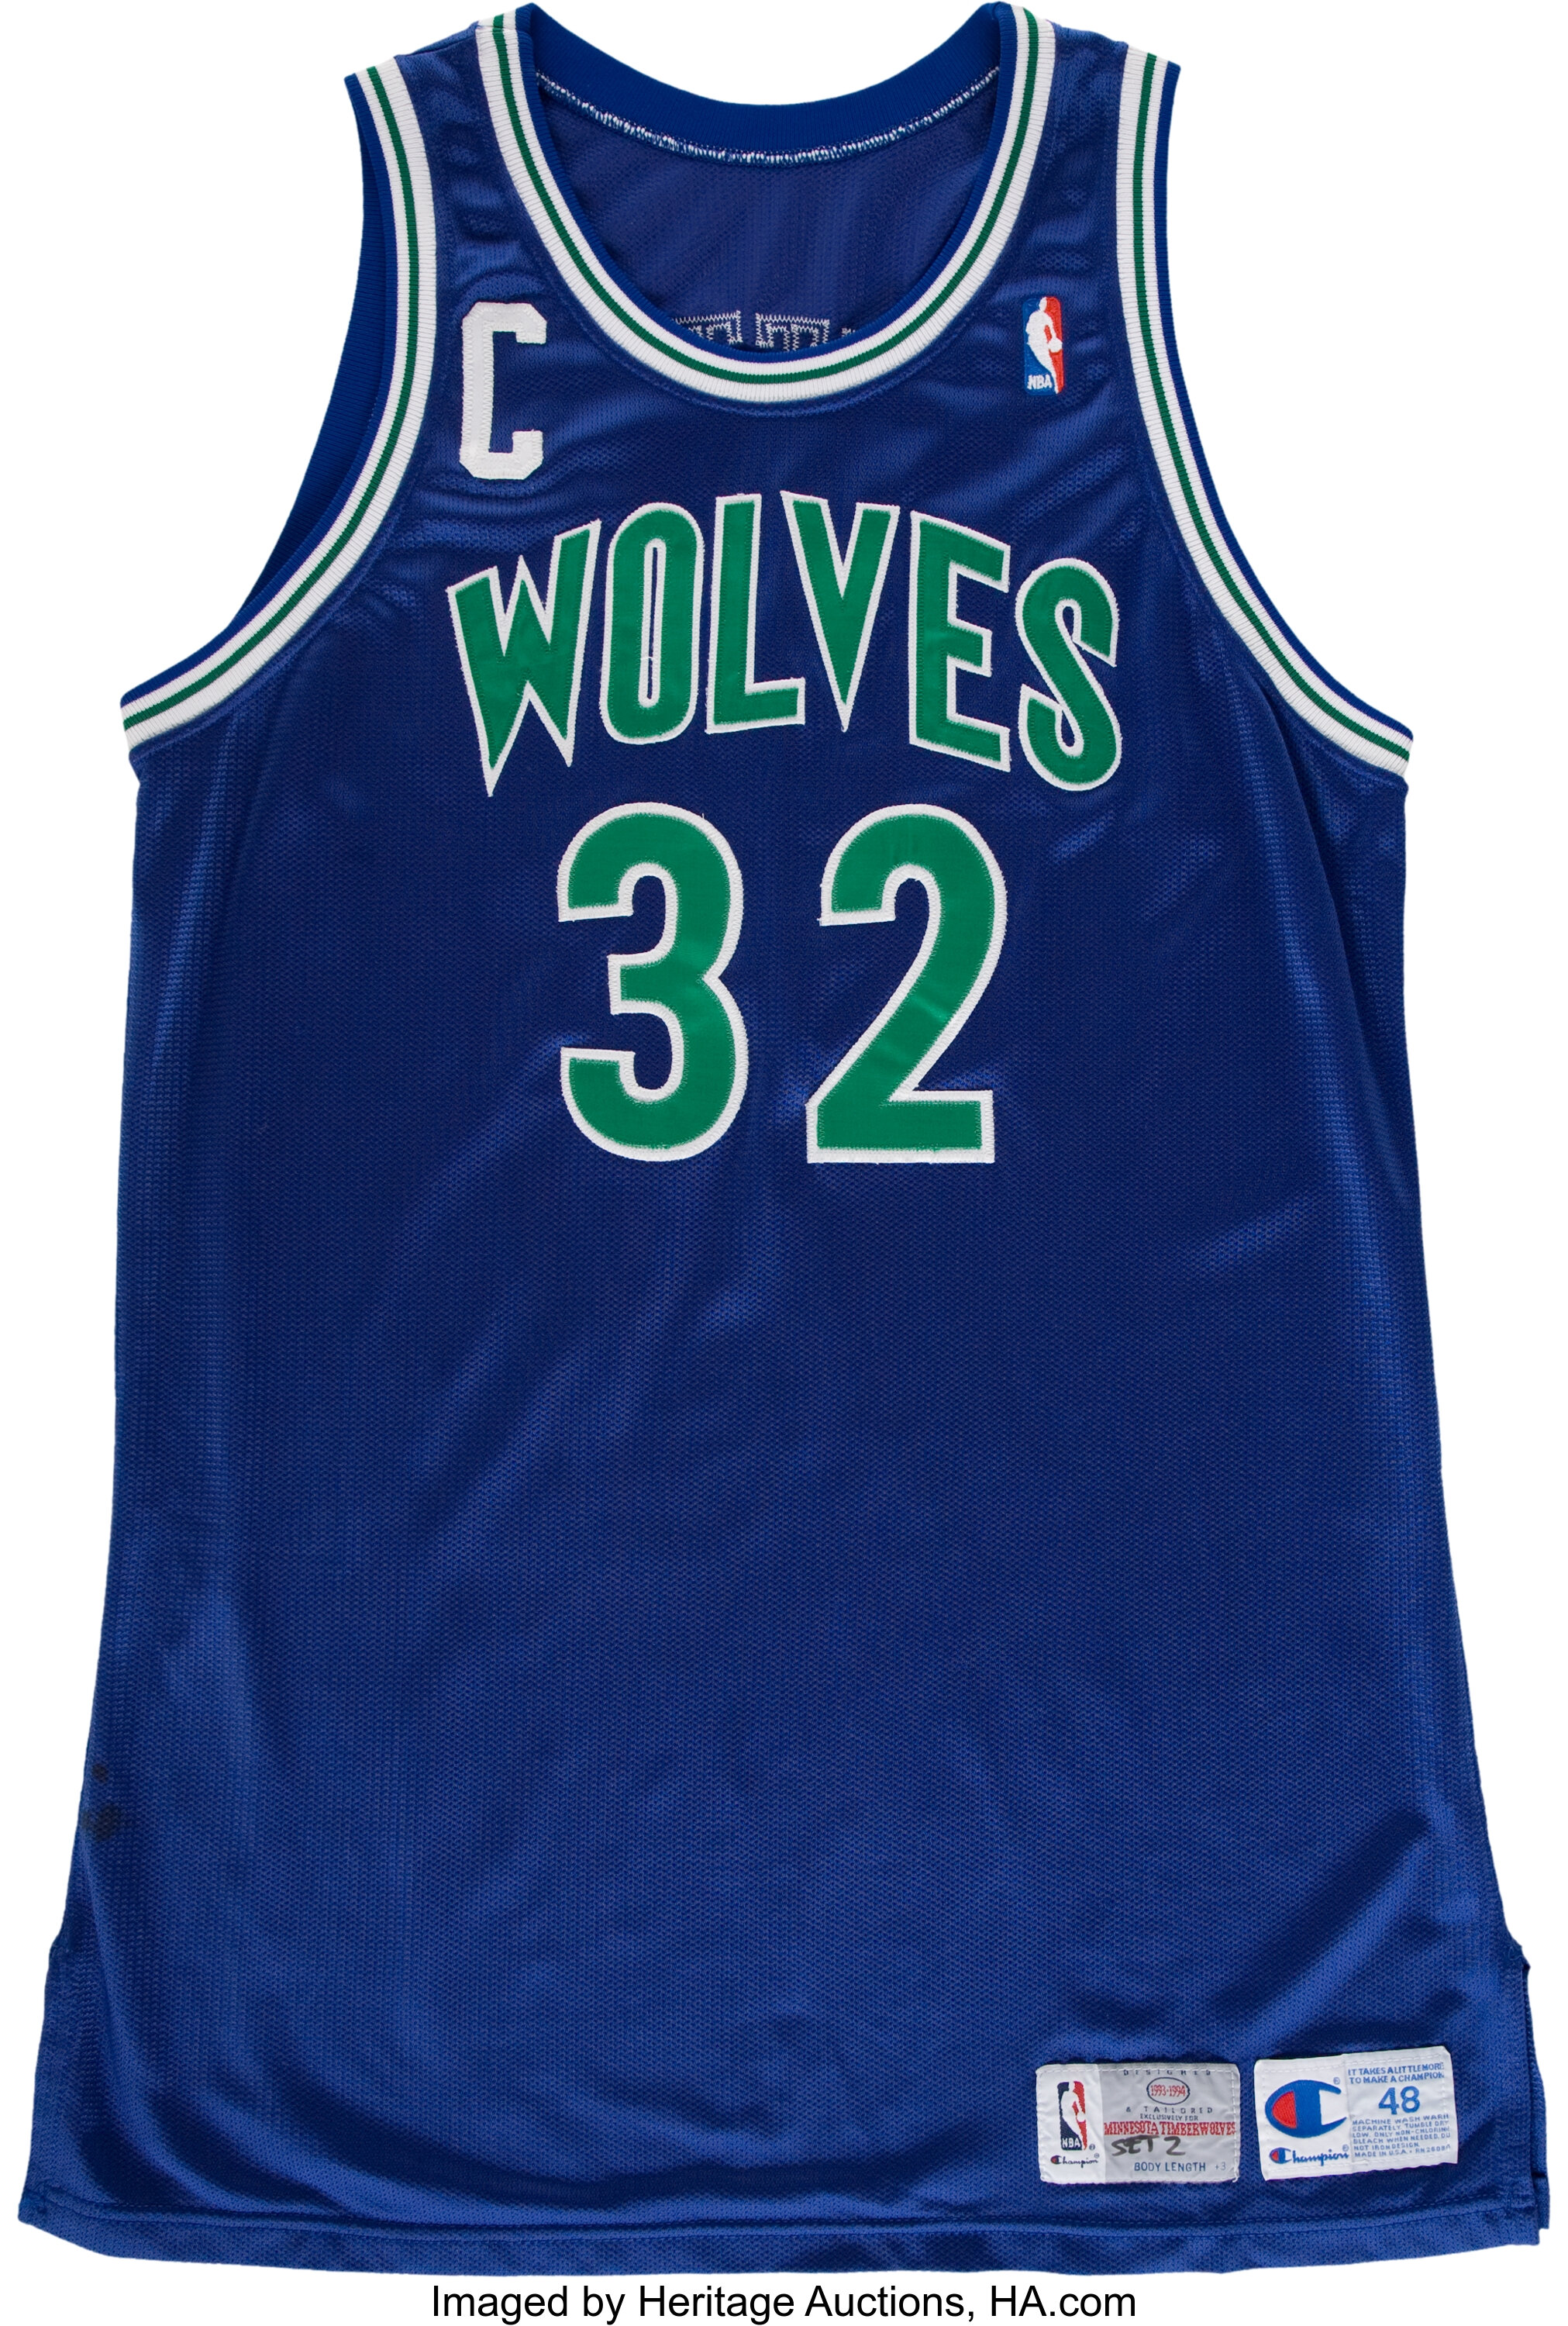 Wolves Jersey 2